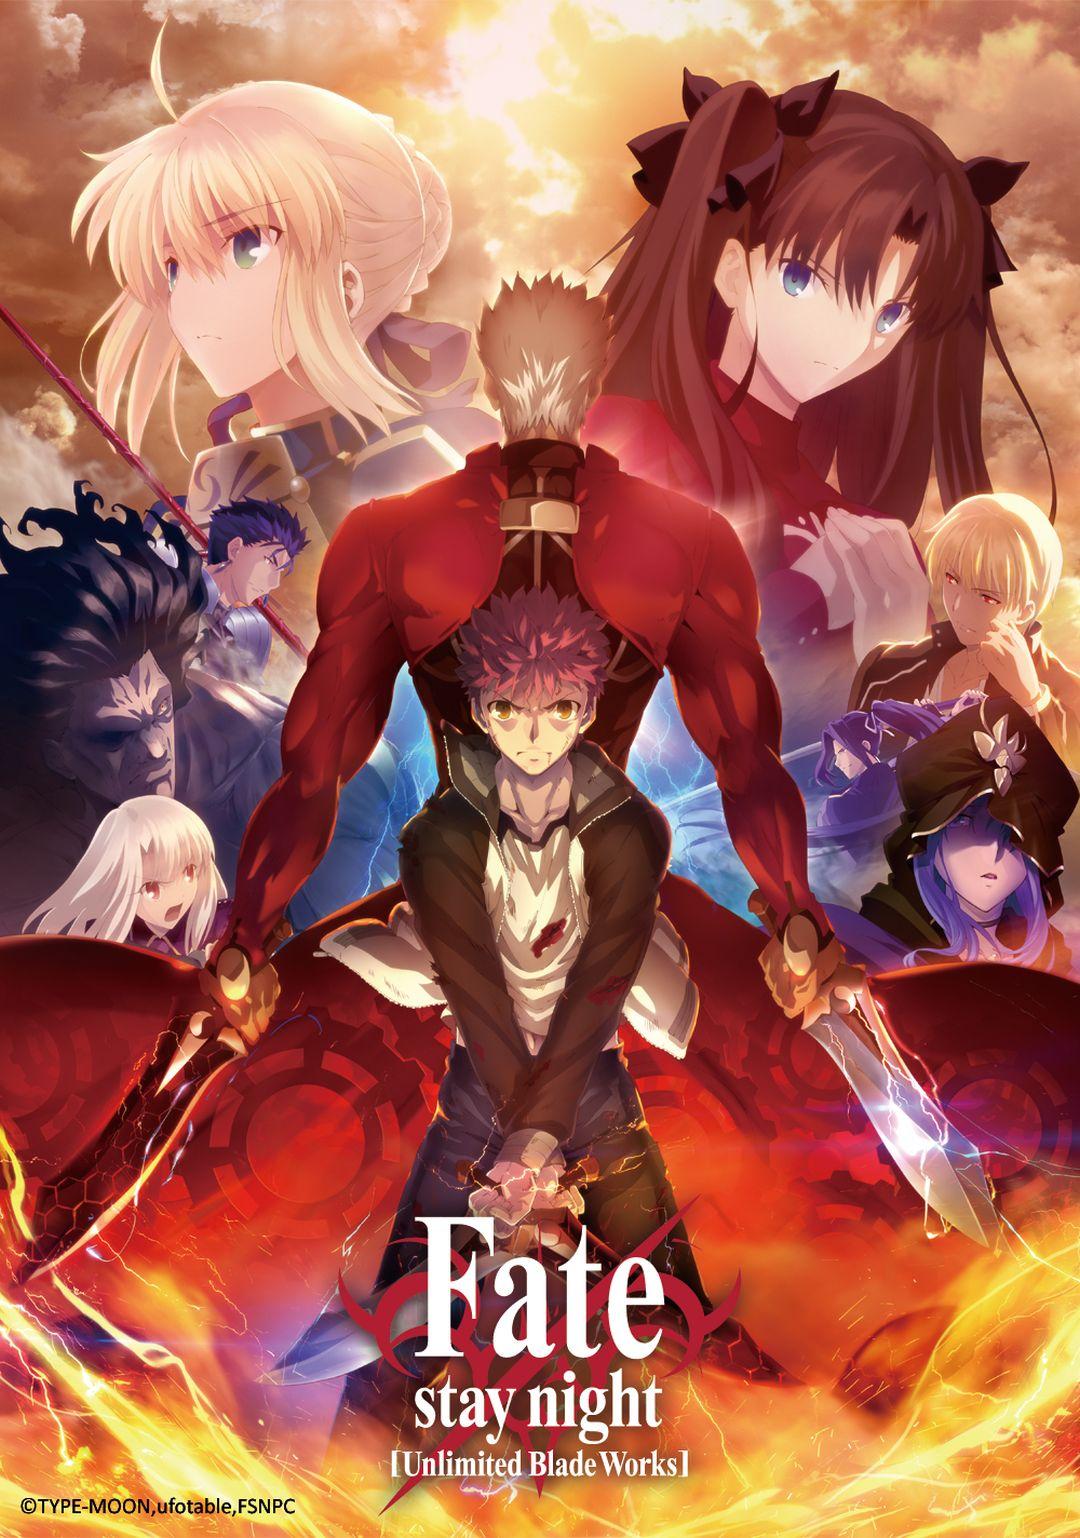 Fate / Stay night 無限劍製Fate / Stay night Unlimited Blade Works